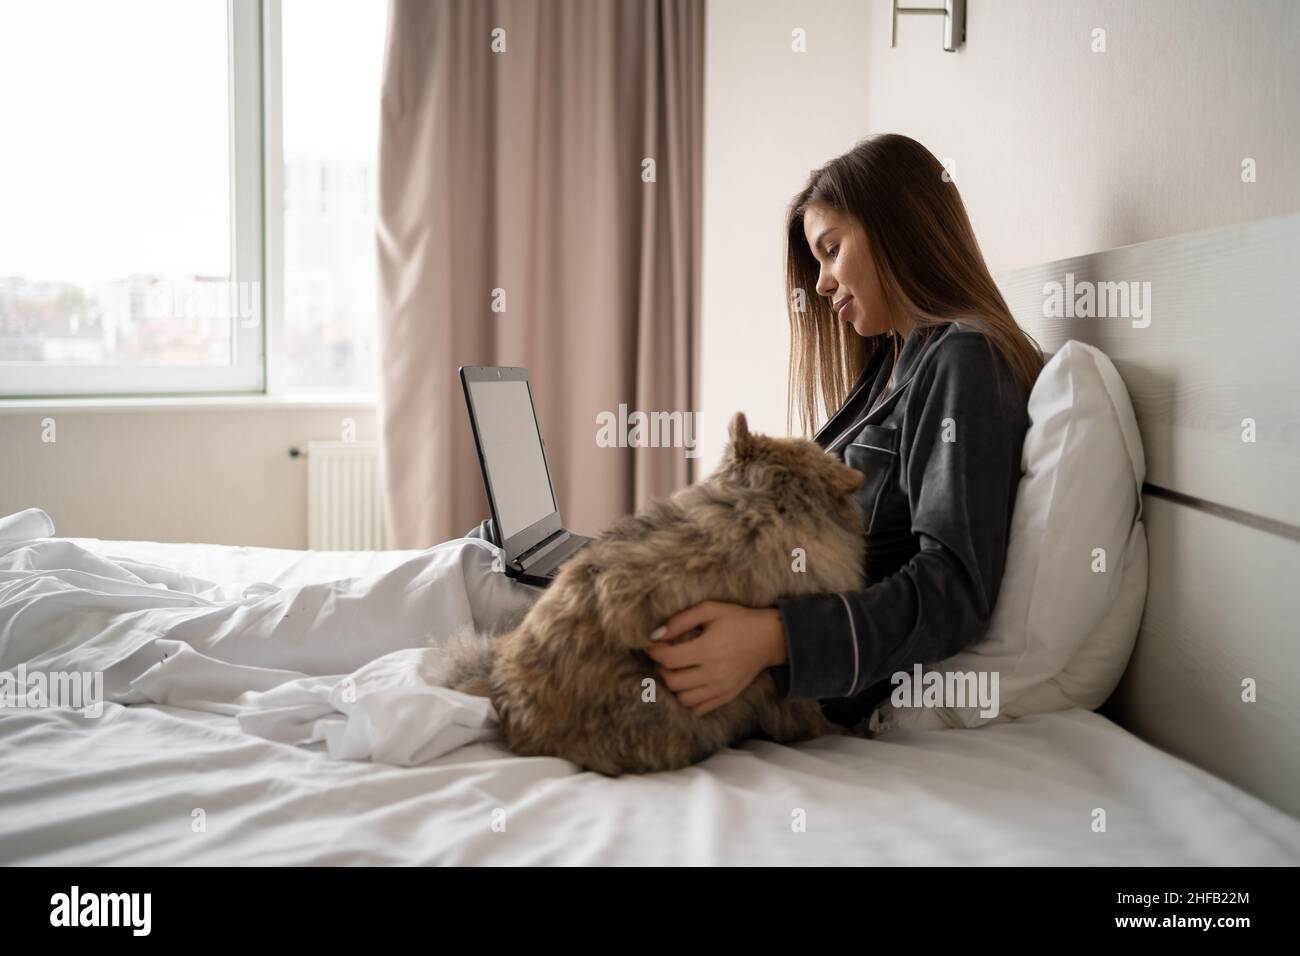 A beautiful girl in pajamas uses a laptop working remotely at home sitting on the bed, a spitz dog sits next to the hostess. copy space. Stock Photo